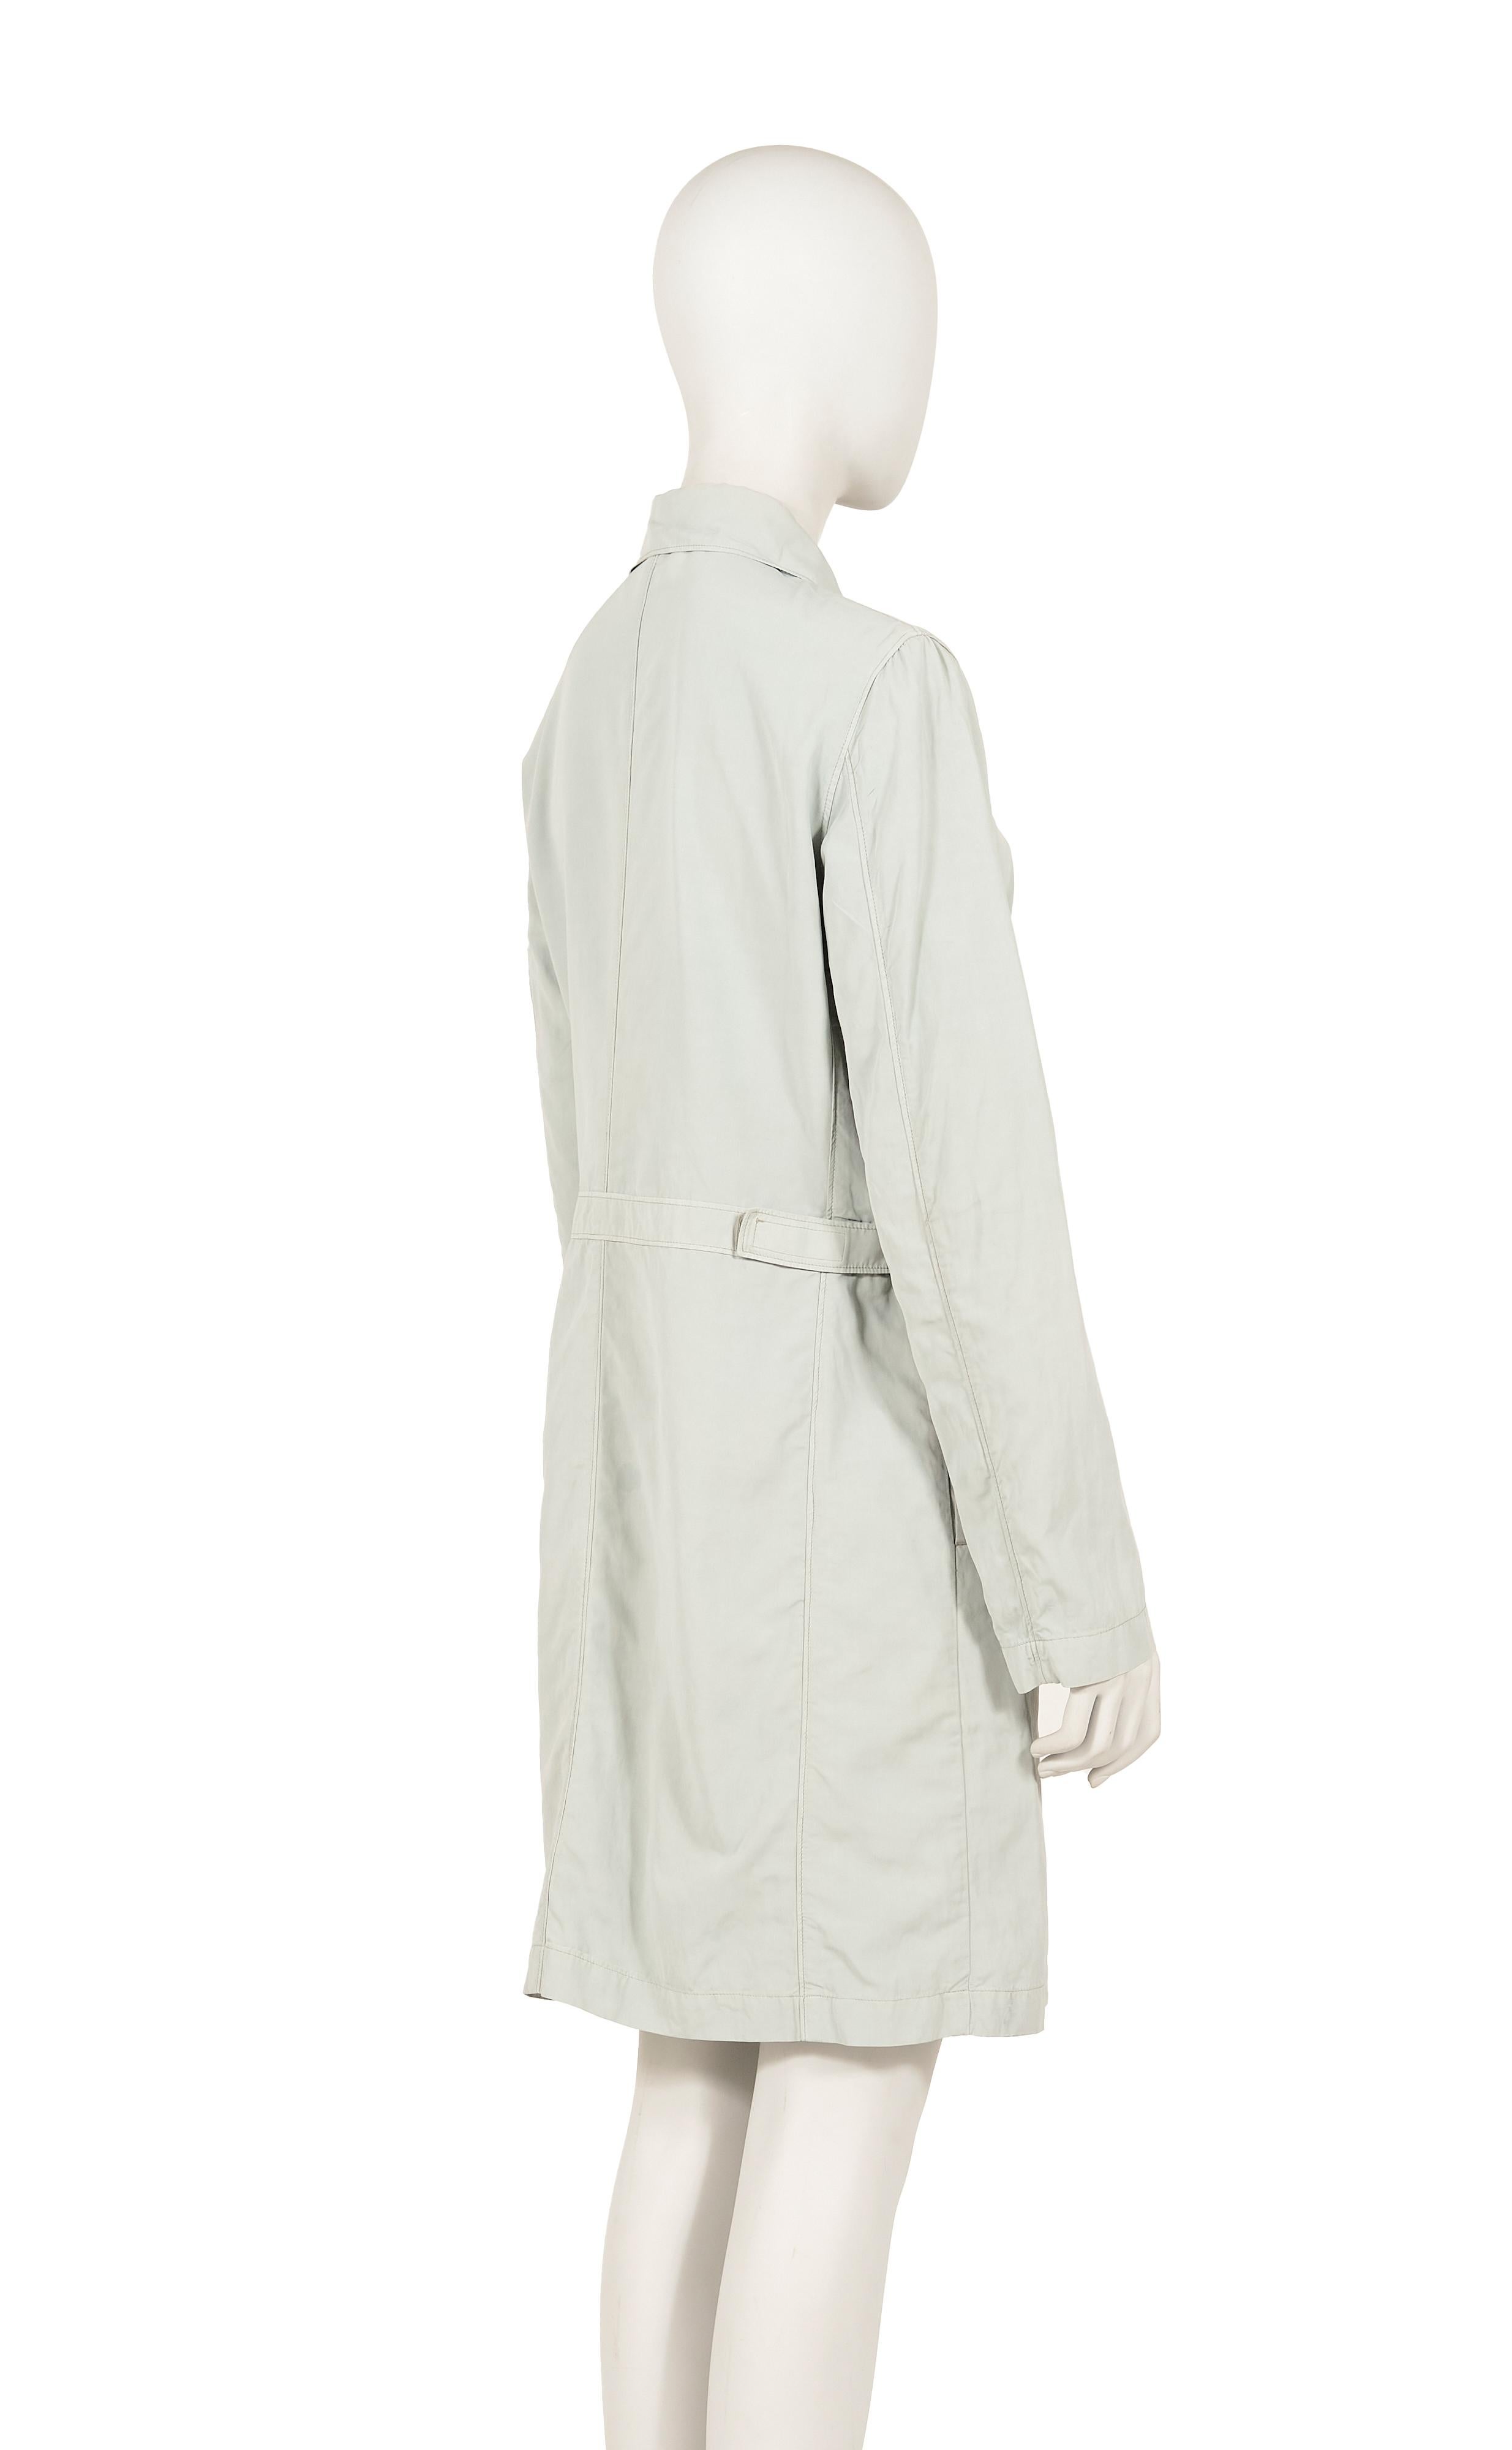 - C.P Company by Massimo Osti
- Sold by Gold Palms Vintage 
- Spring Summer 1999 collection
- Grey lightweight trench coat
- Internal invisible zipper
- Back velcro adjustable straps
- Size: IT 44
